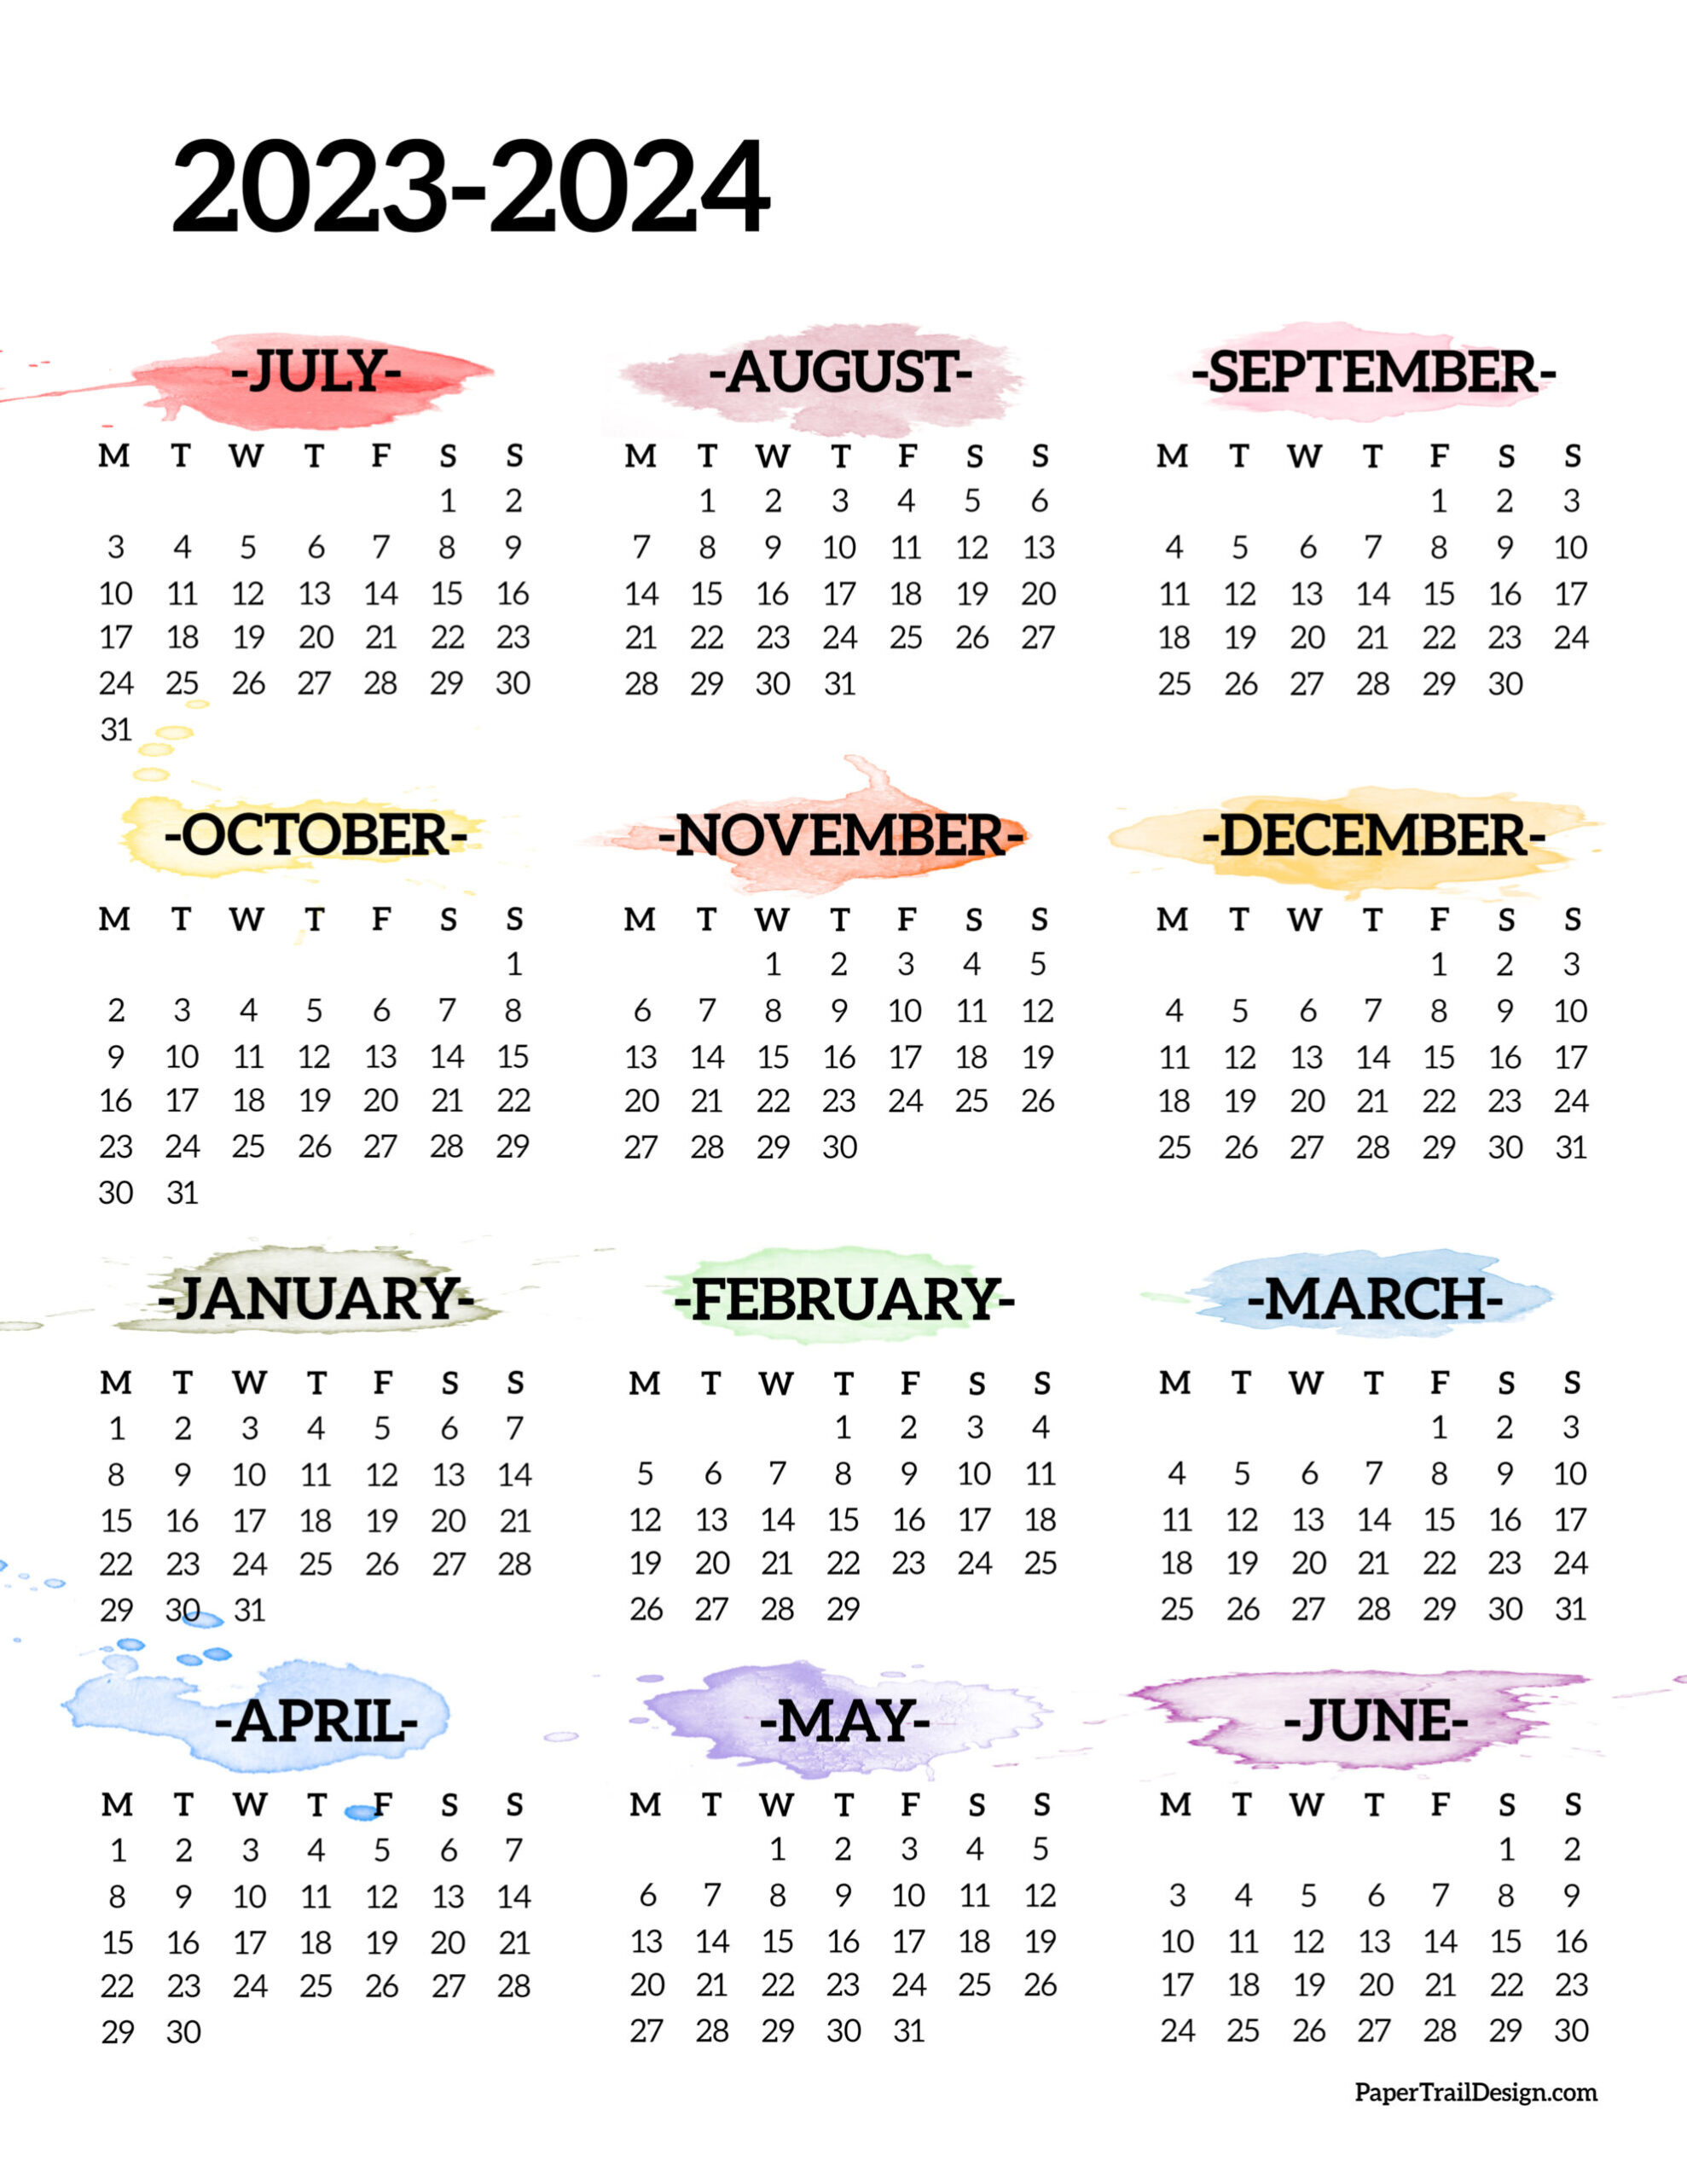 2023-2024 School Year Calendar Free Printable - Paper Trail Design in Calendar From July 2023 To June 2024